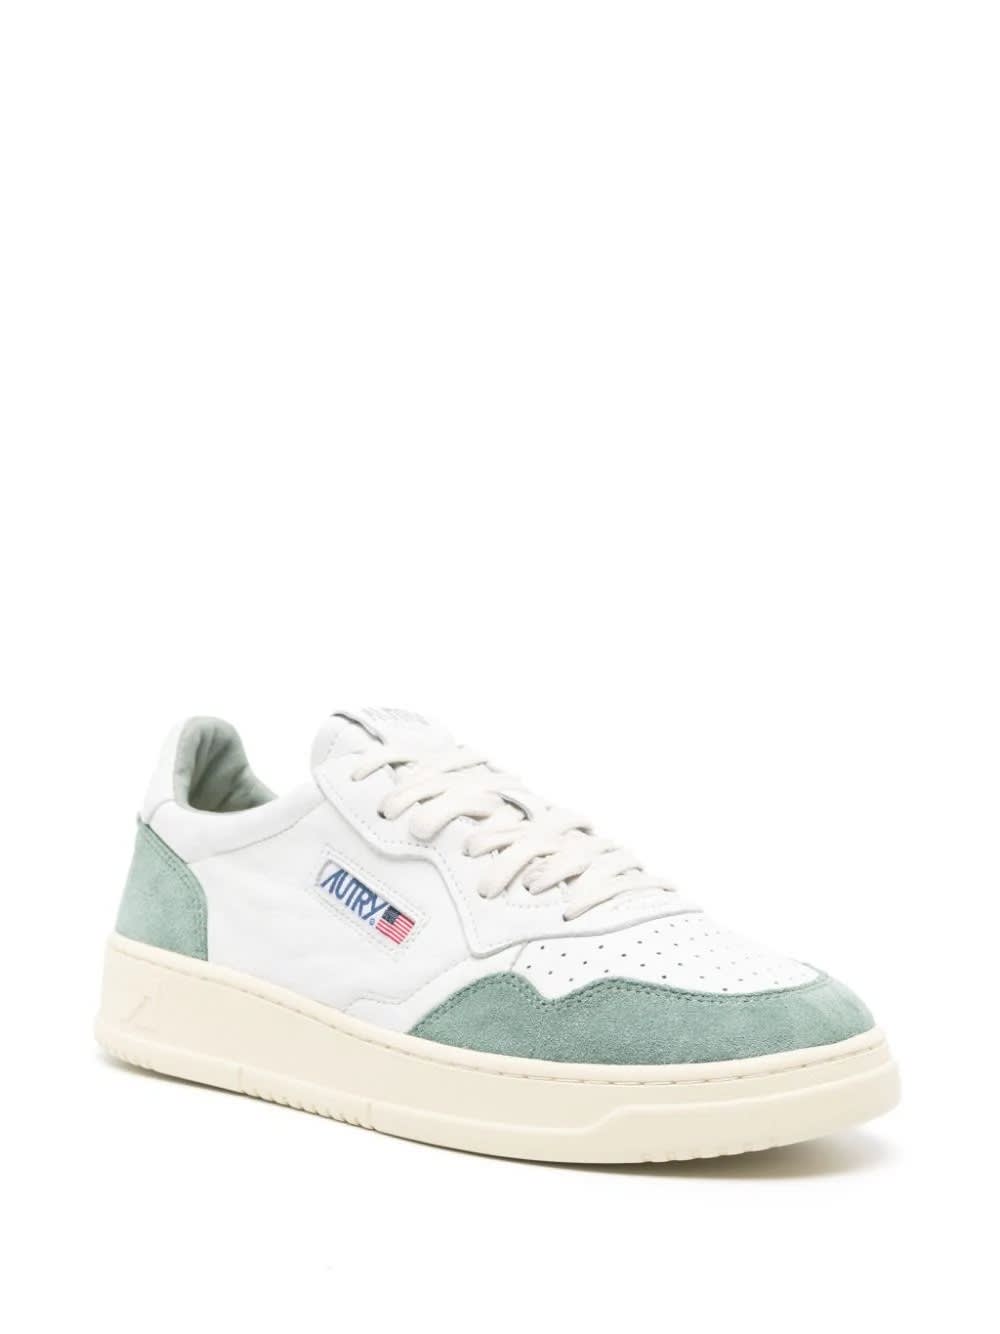 Shop Autry Medalist Low Sneakers In Green Suede And White Leather